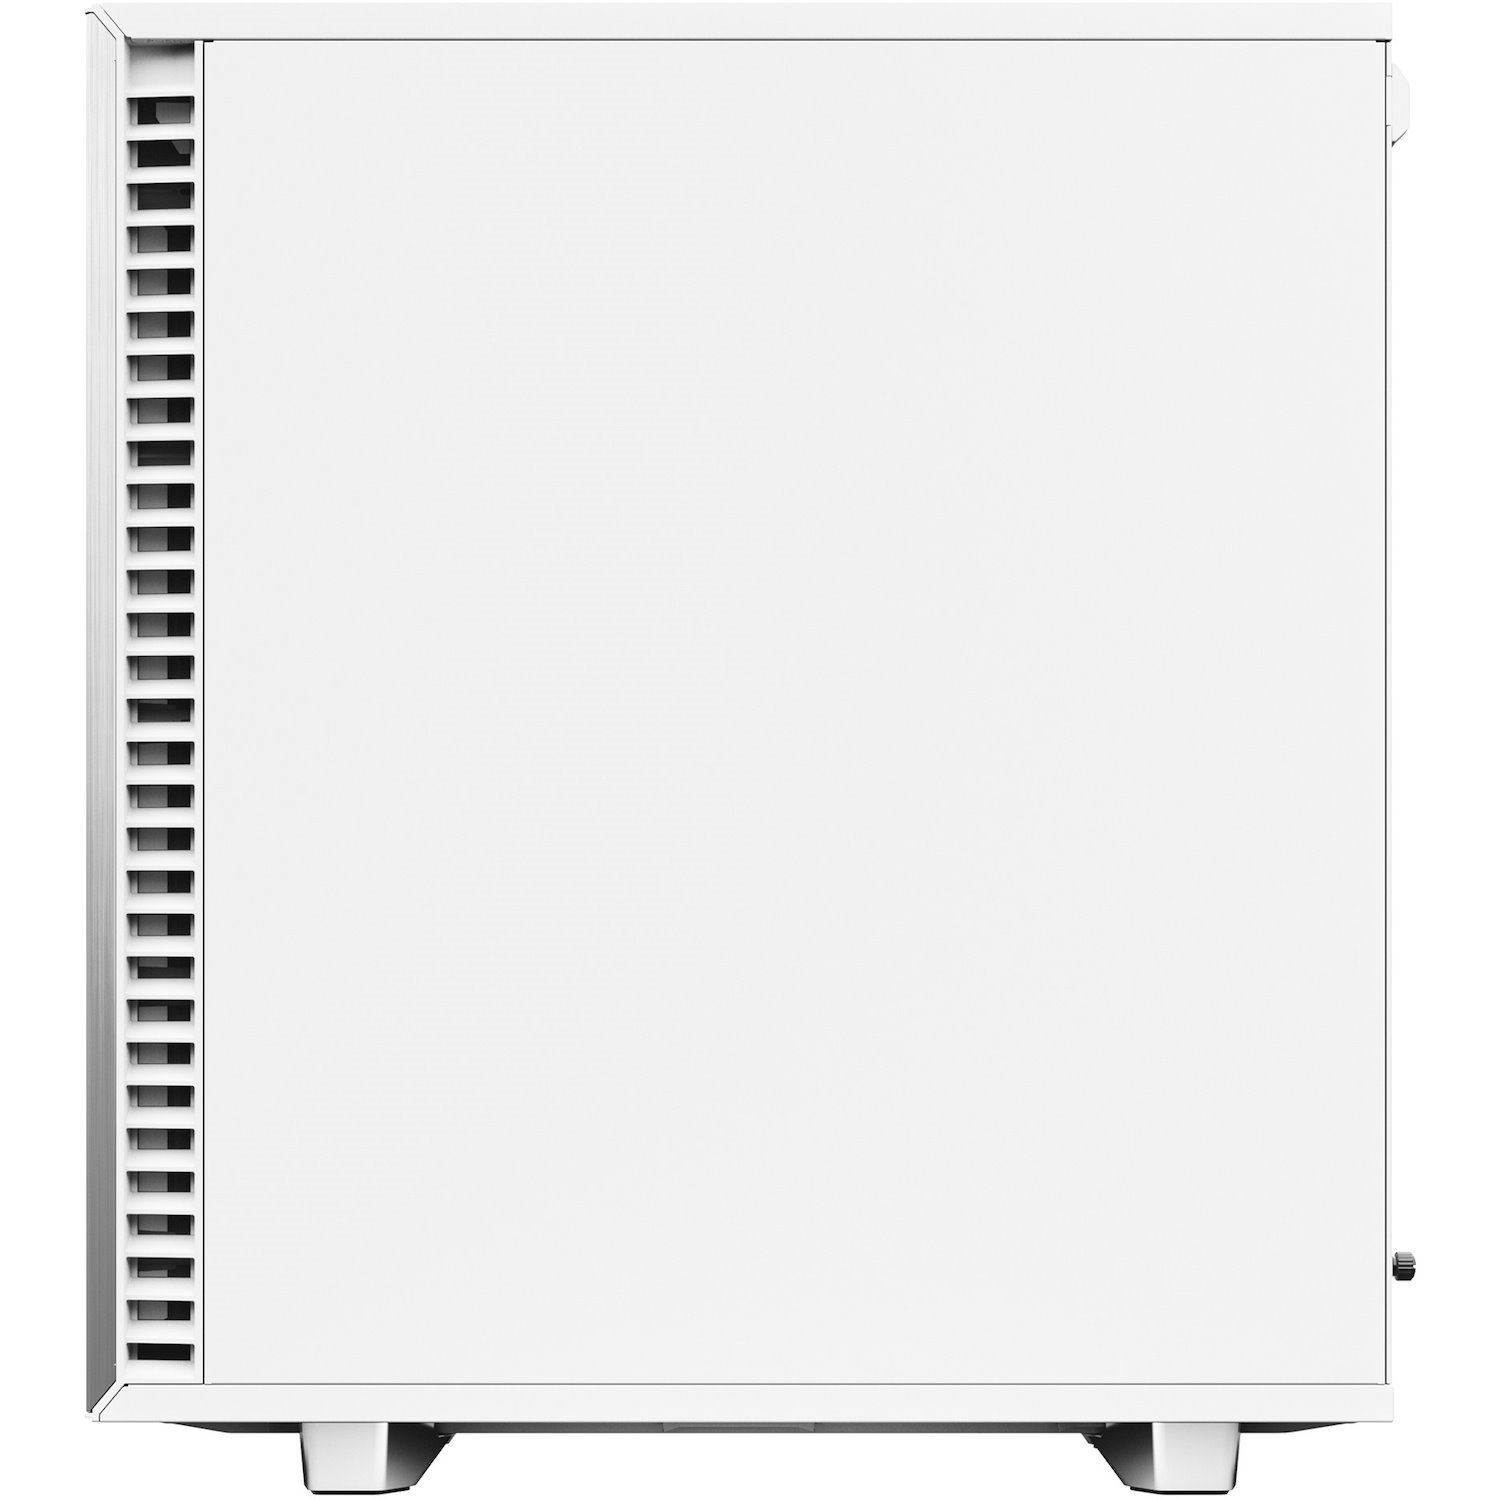 Fractal Design Define 7 Computer Case - ATX Motherboard Supported - Mid-tower - Brushed Aluminium - White